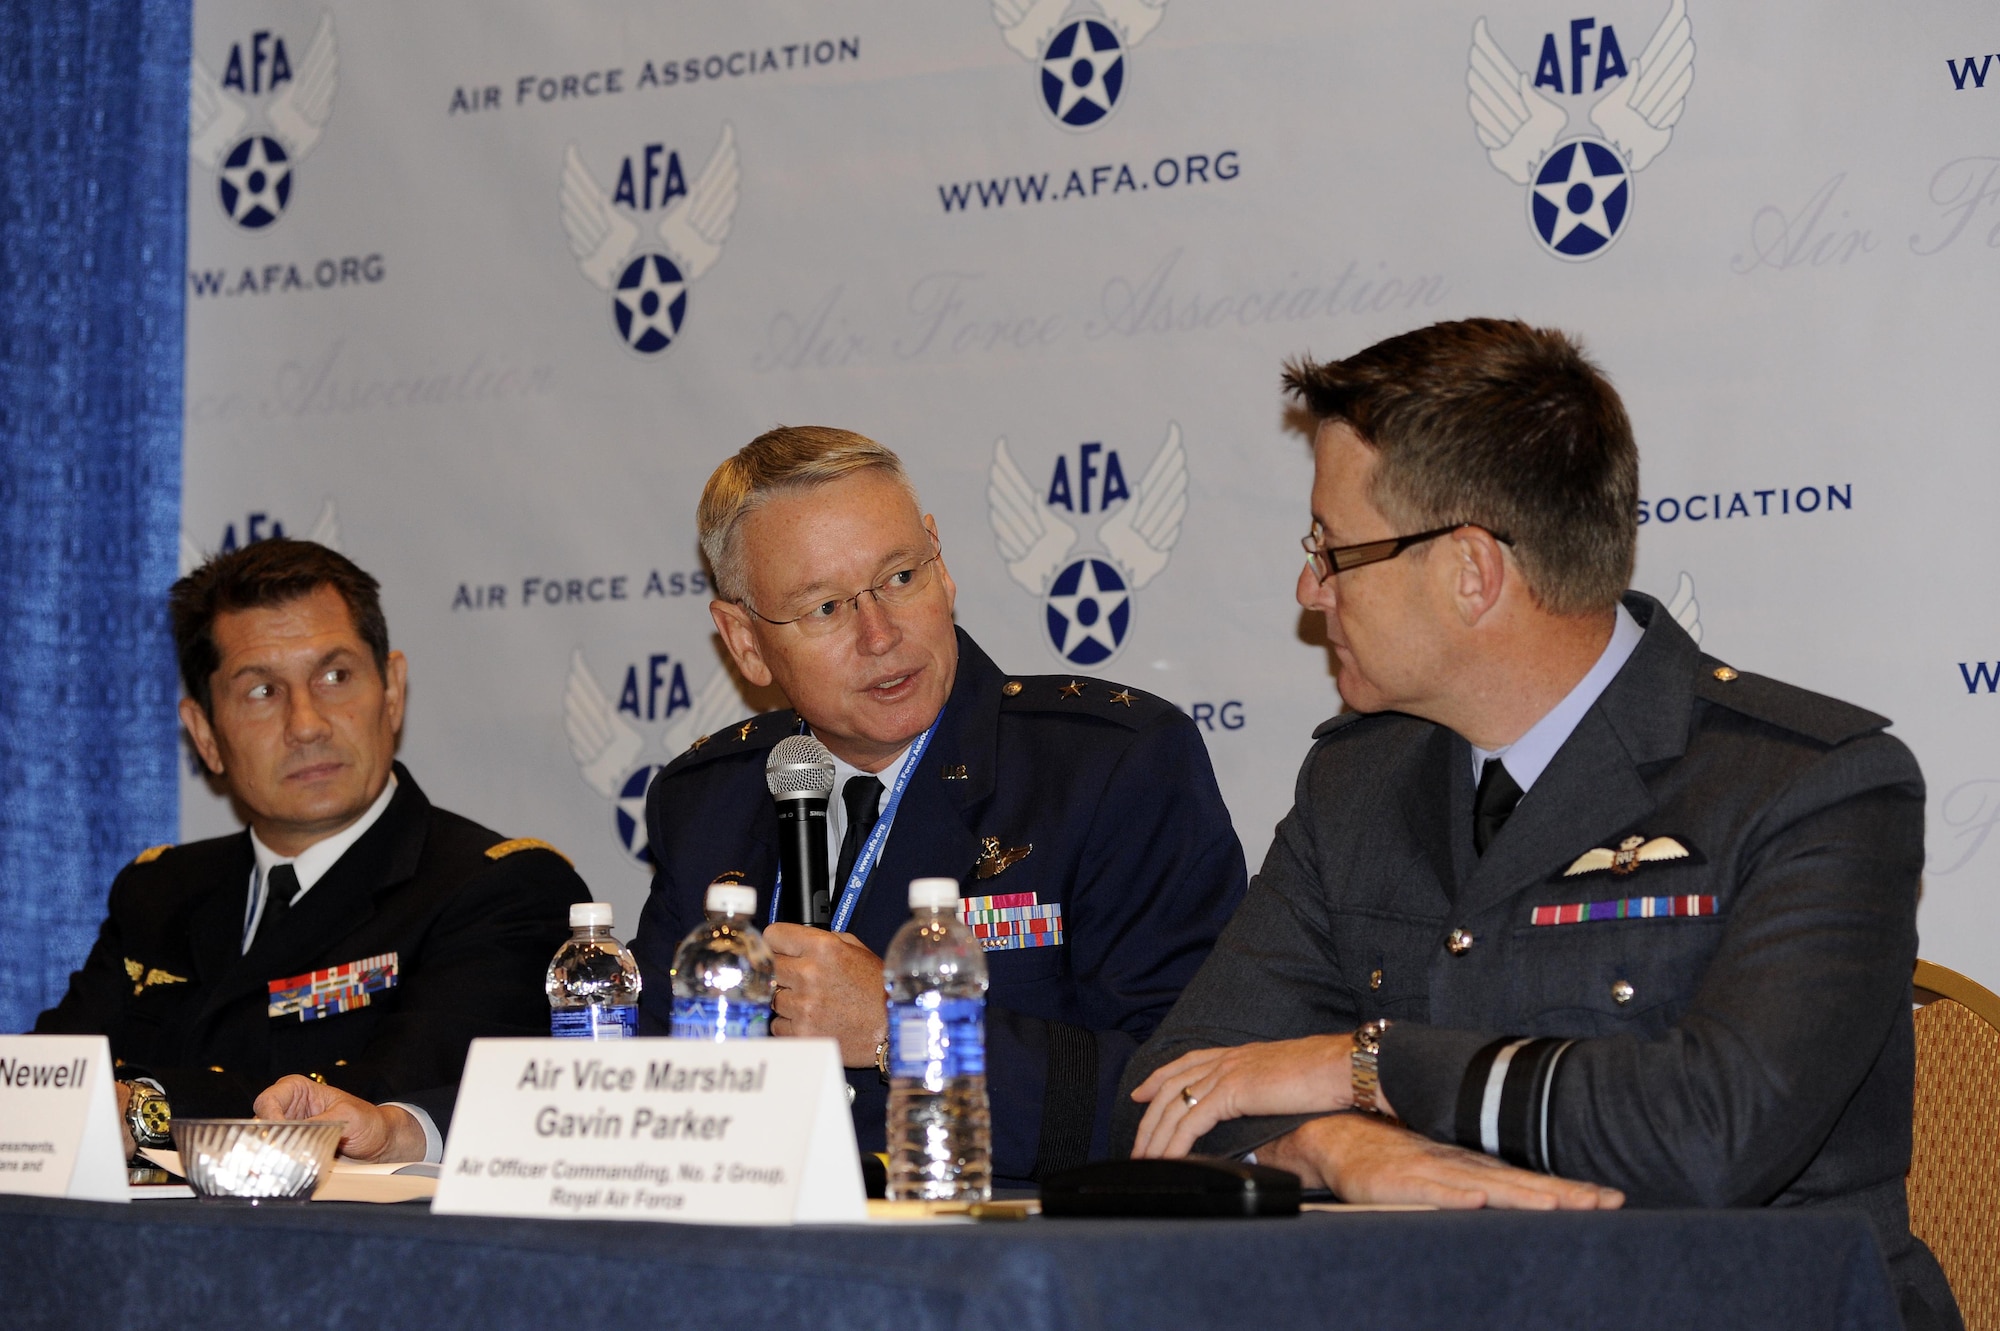 Maj. Gen. John Newell, director of strategy, concepts and assessments, deputy chief of staff for strategic plans and requirements, speaks on a panel during the 2015 Air Force Association Air and Space Conference and Technology Exposition in Washington, D.C., Sept. 15, 2015. The trilateral strategic initiative panel discussed each of the countries (U.S., France and the U.K.) consolidated goals on building confidence within each other's capabilities by training together twice a year to meet their objectives. (U.S. Air Force photo/Staff Sgt. Whitney Stanfield)